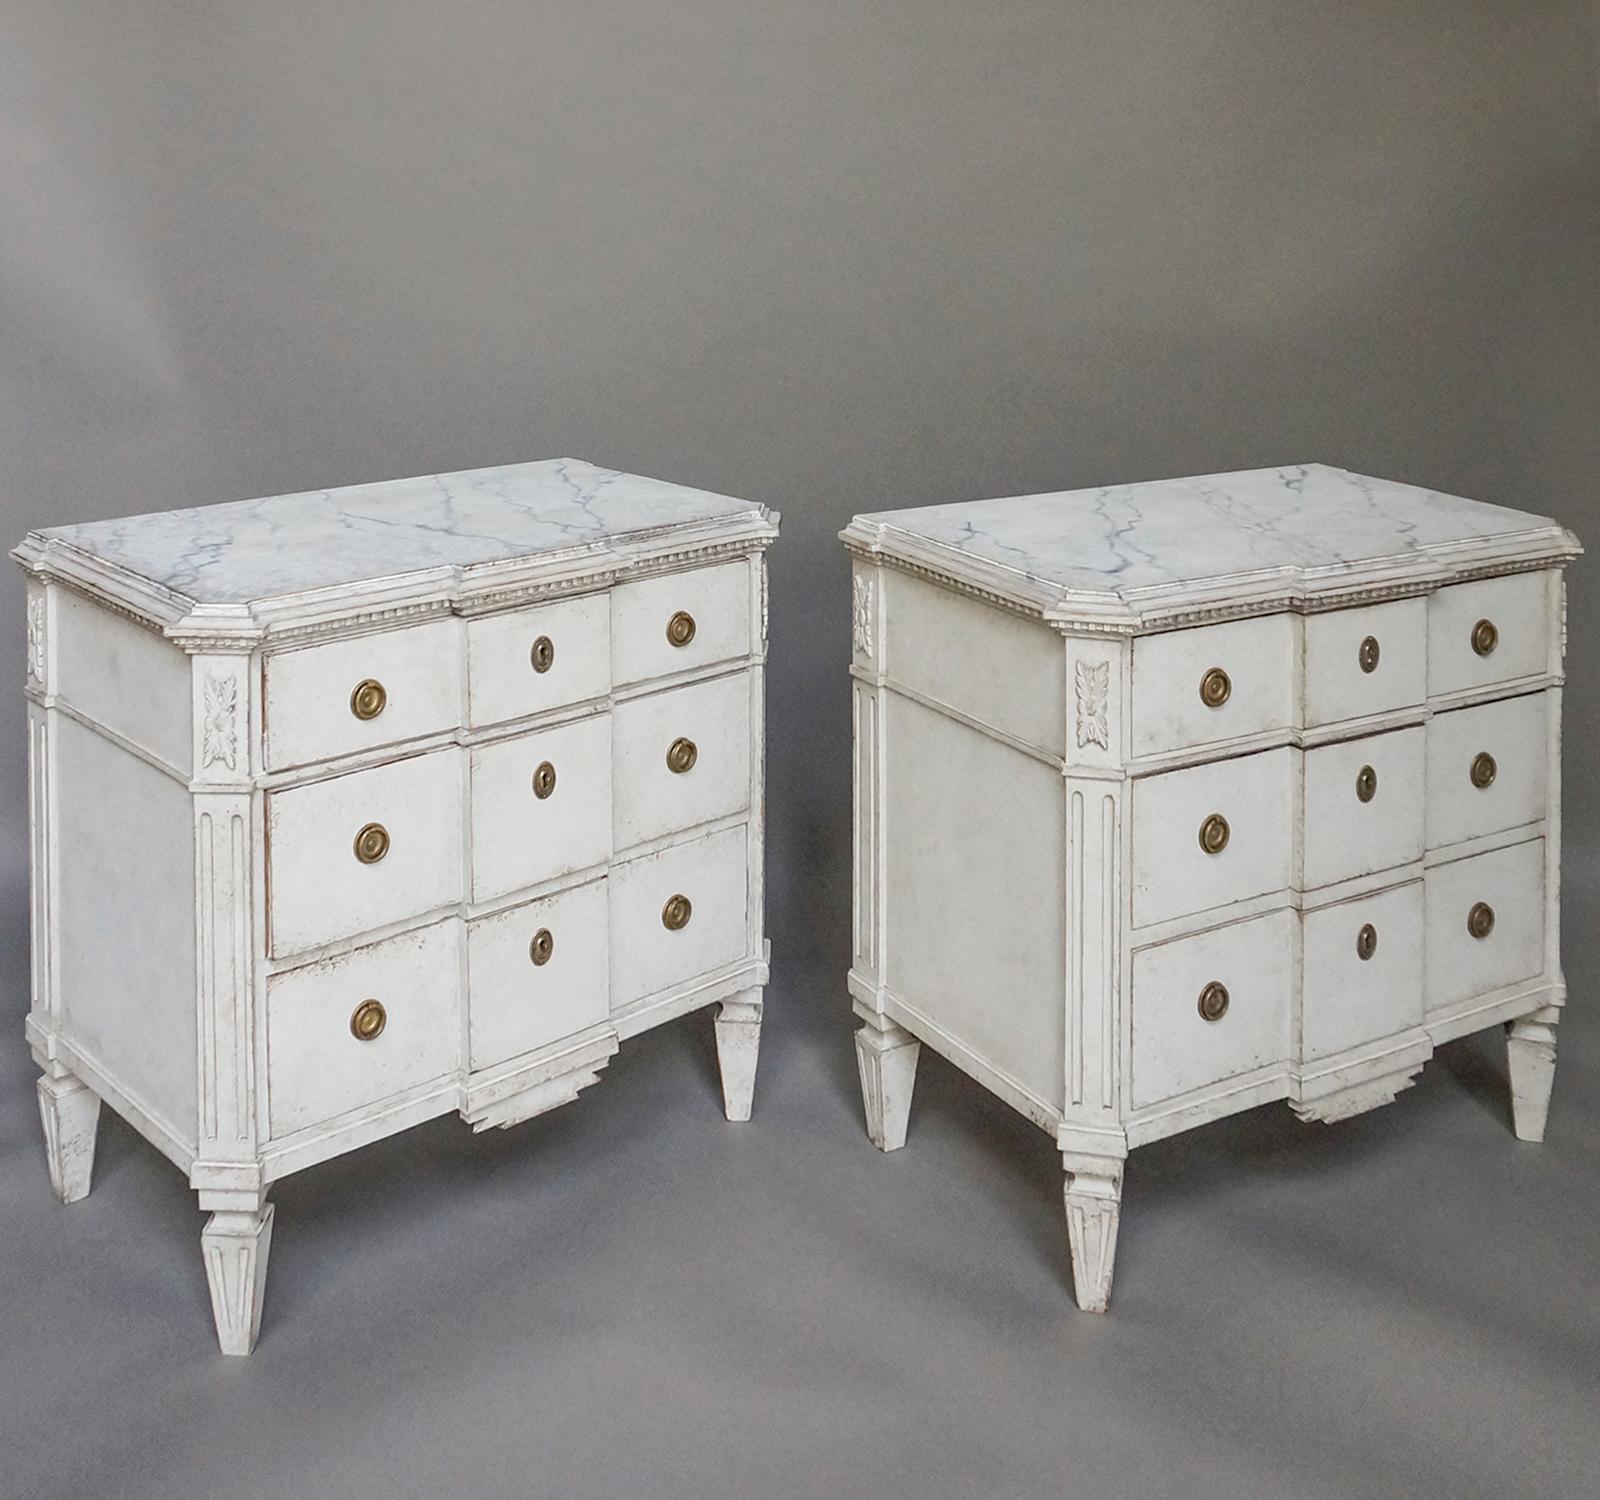 Pair of neoclassical style commodes, Sweden, circa 1910. The shaped tops are painted with a faux marble design and have finely carved dentil trim. The canted corners have applied foliate carvings above reeding that extends to the tapering square